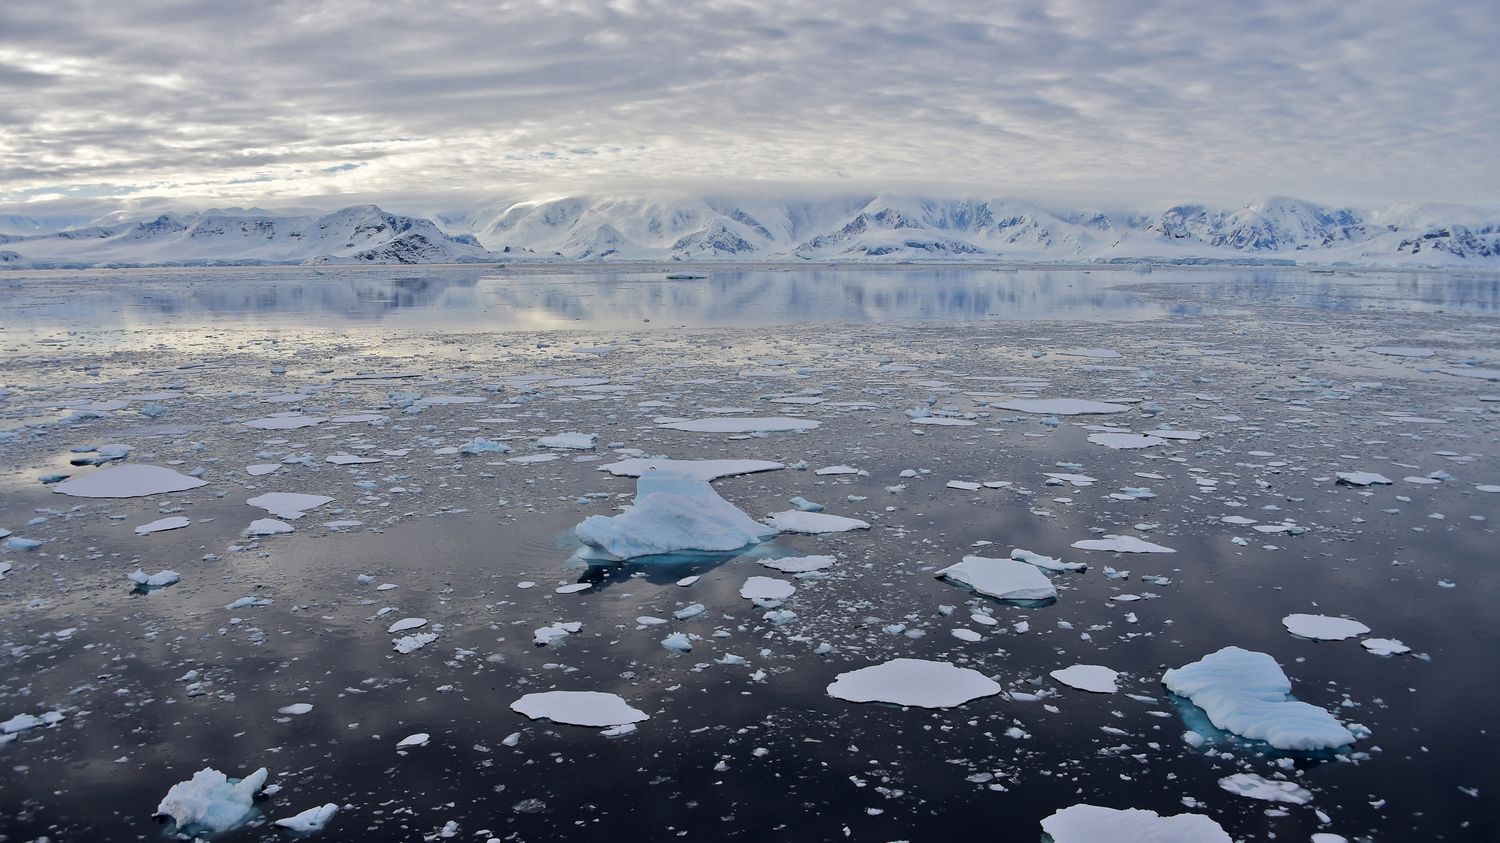 Antarctic sea ice has never been this thin in July, according to a satellite survey

